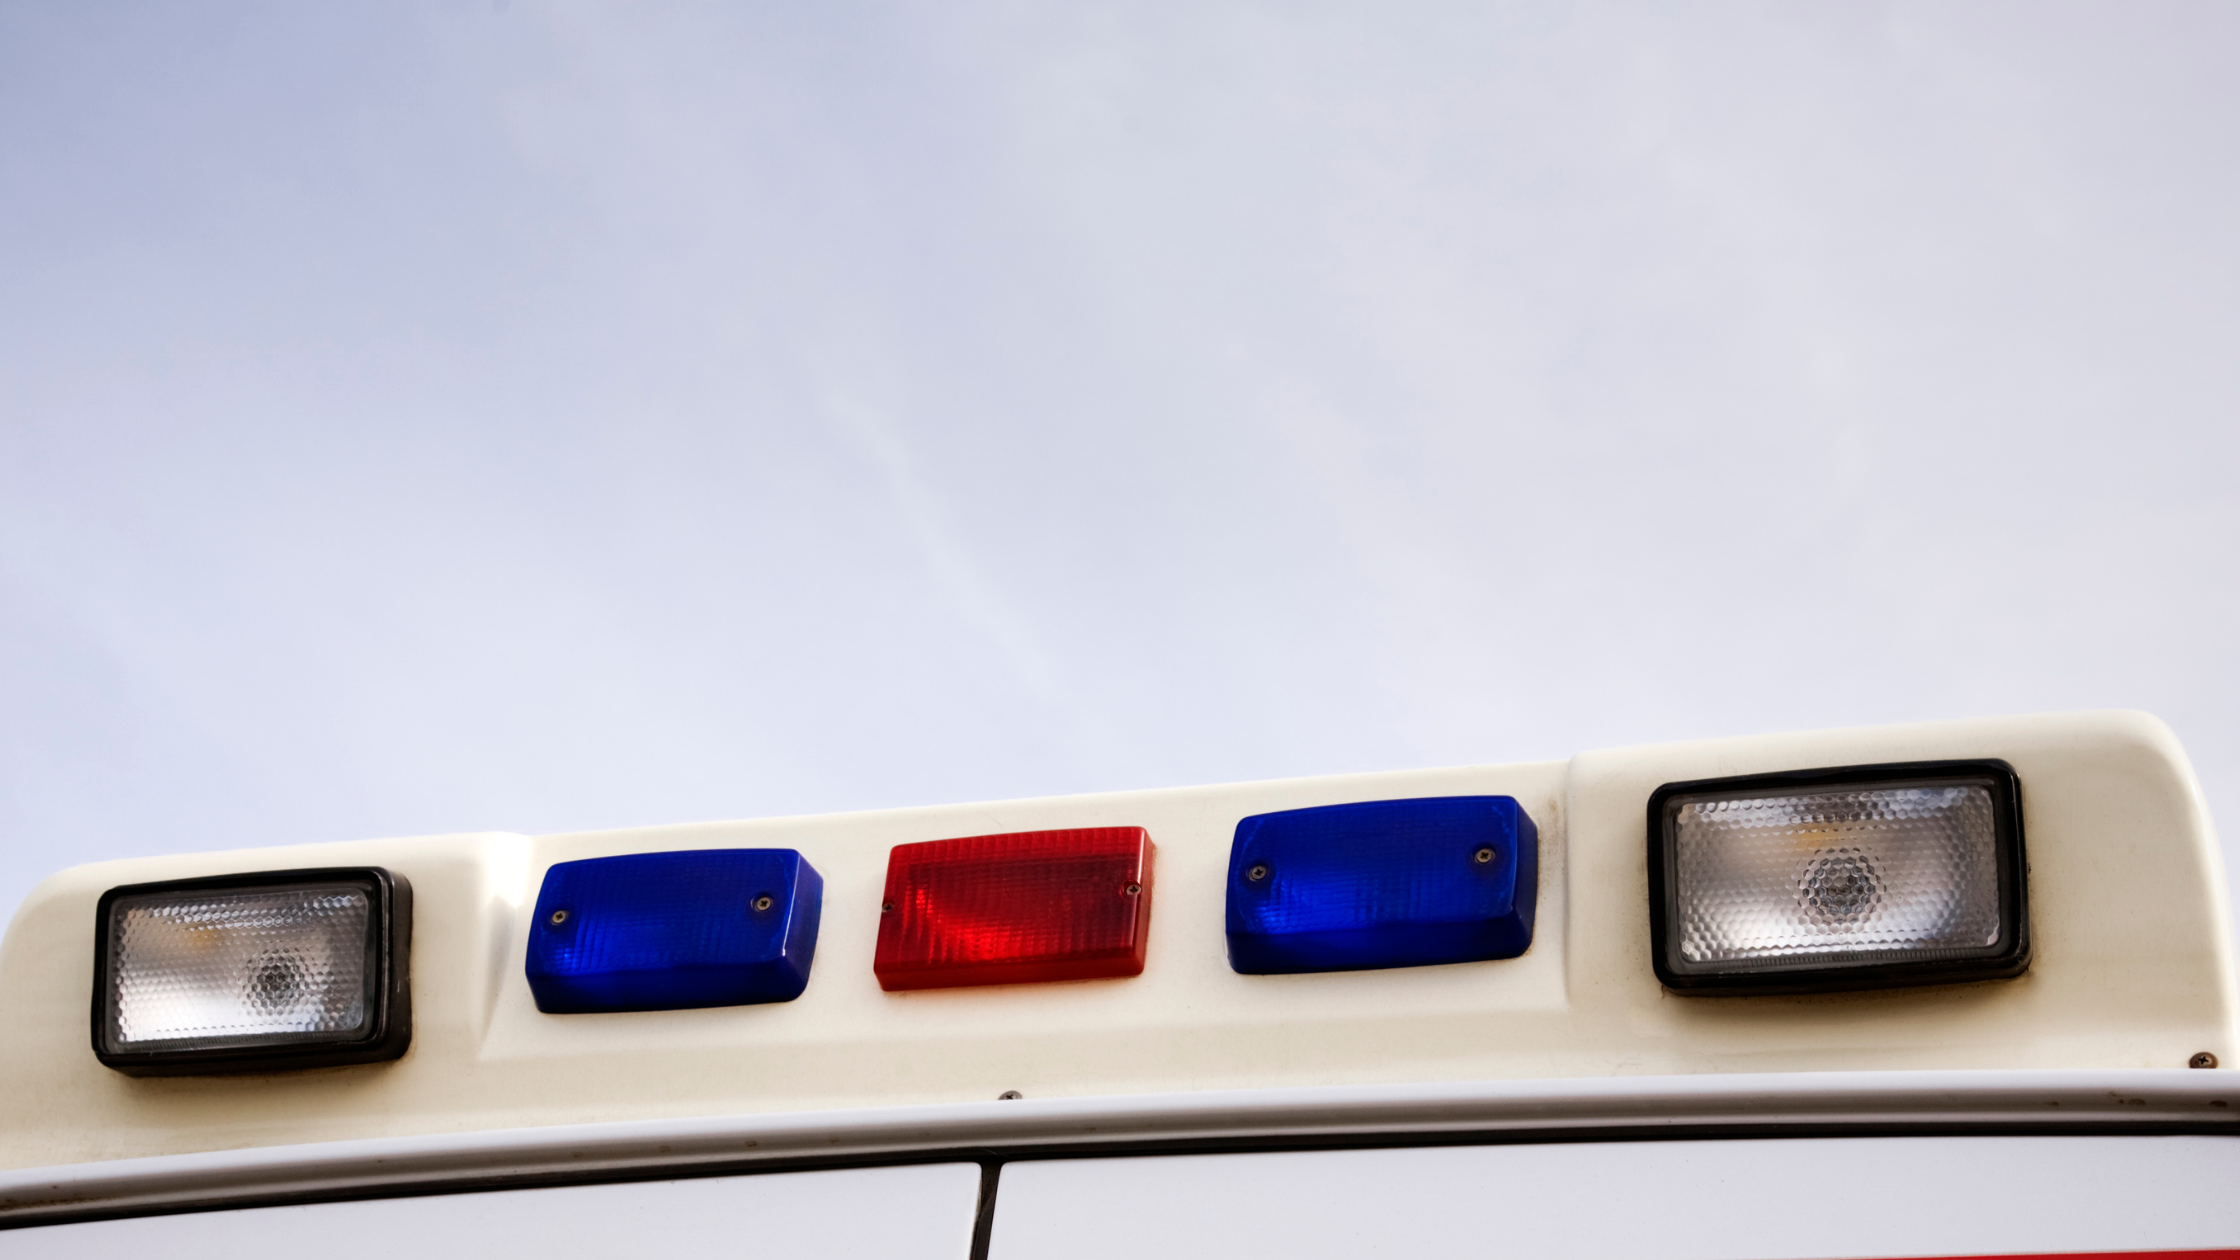 This all-too-common occurrence is costing EMS agencies all too much!